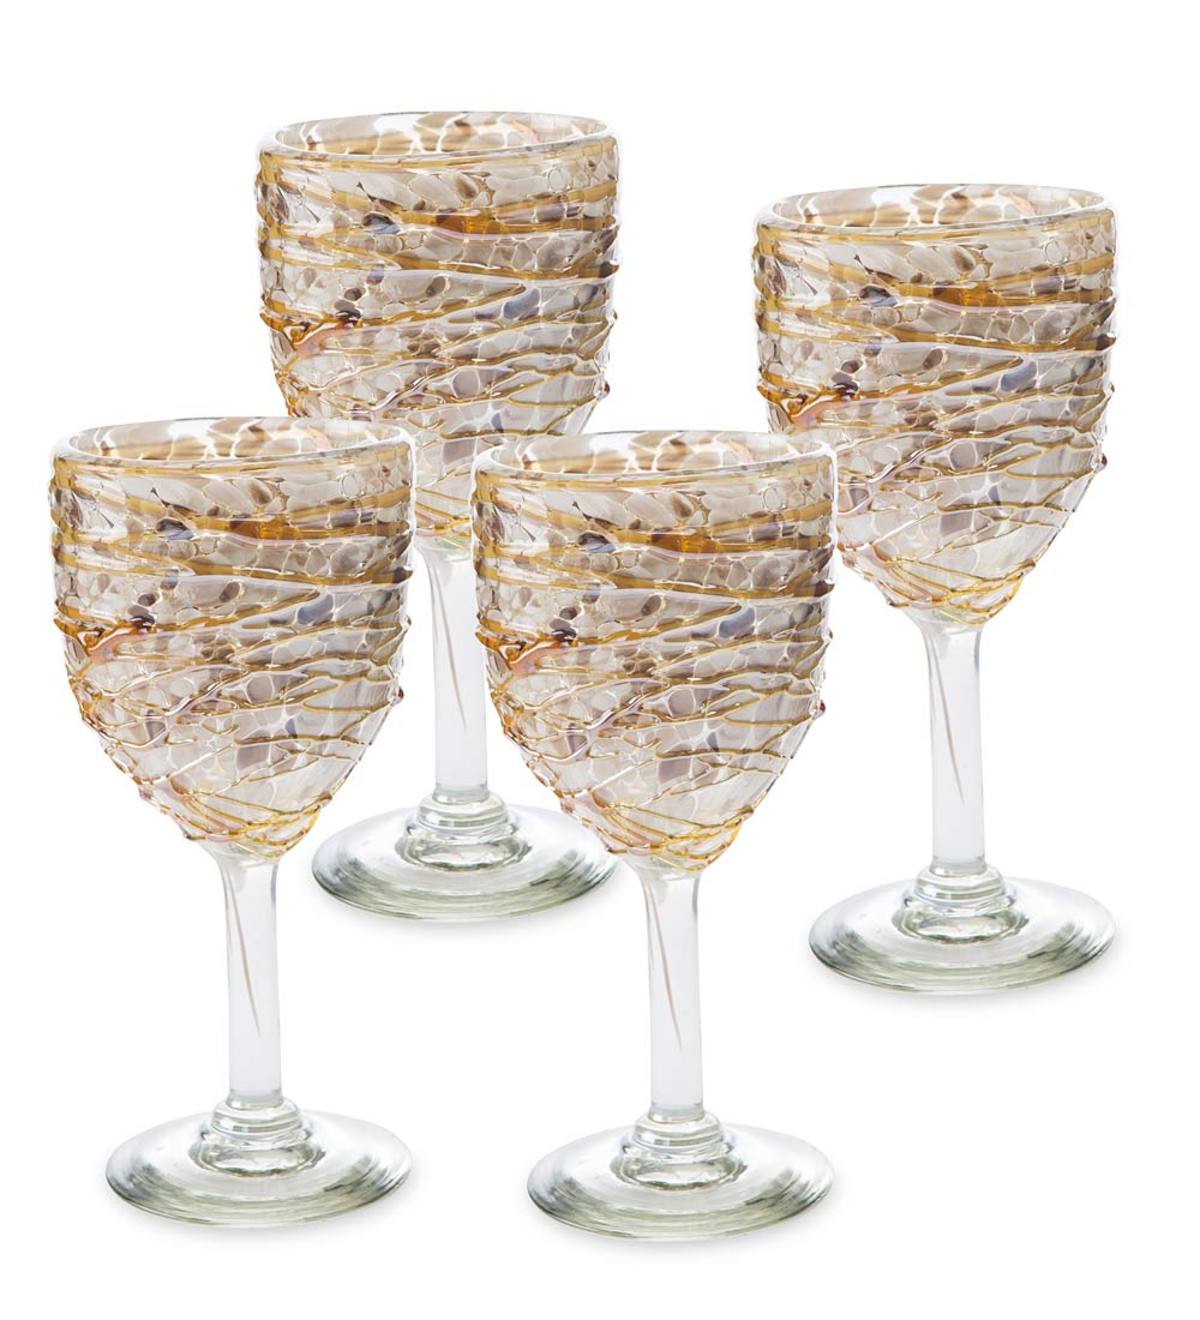 Shimmer Swirled Recycled Glass Goblets, Set of 4